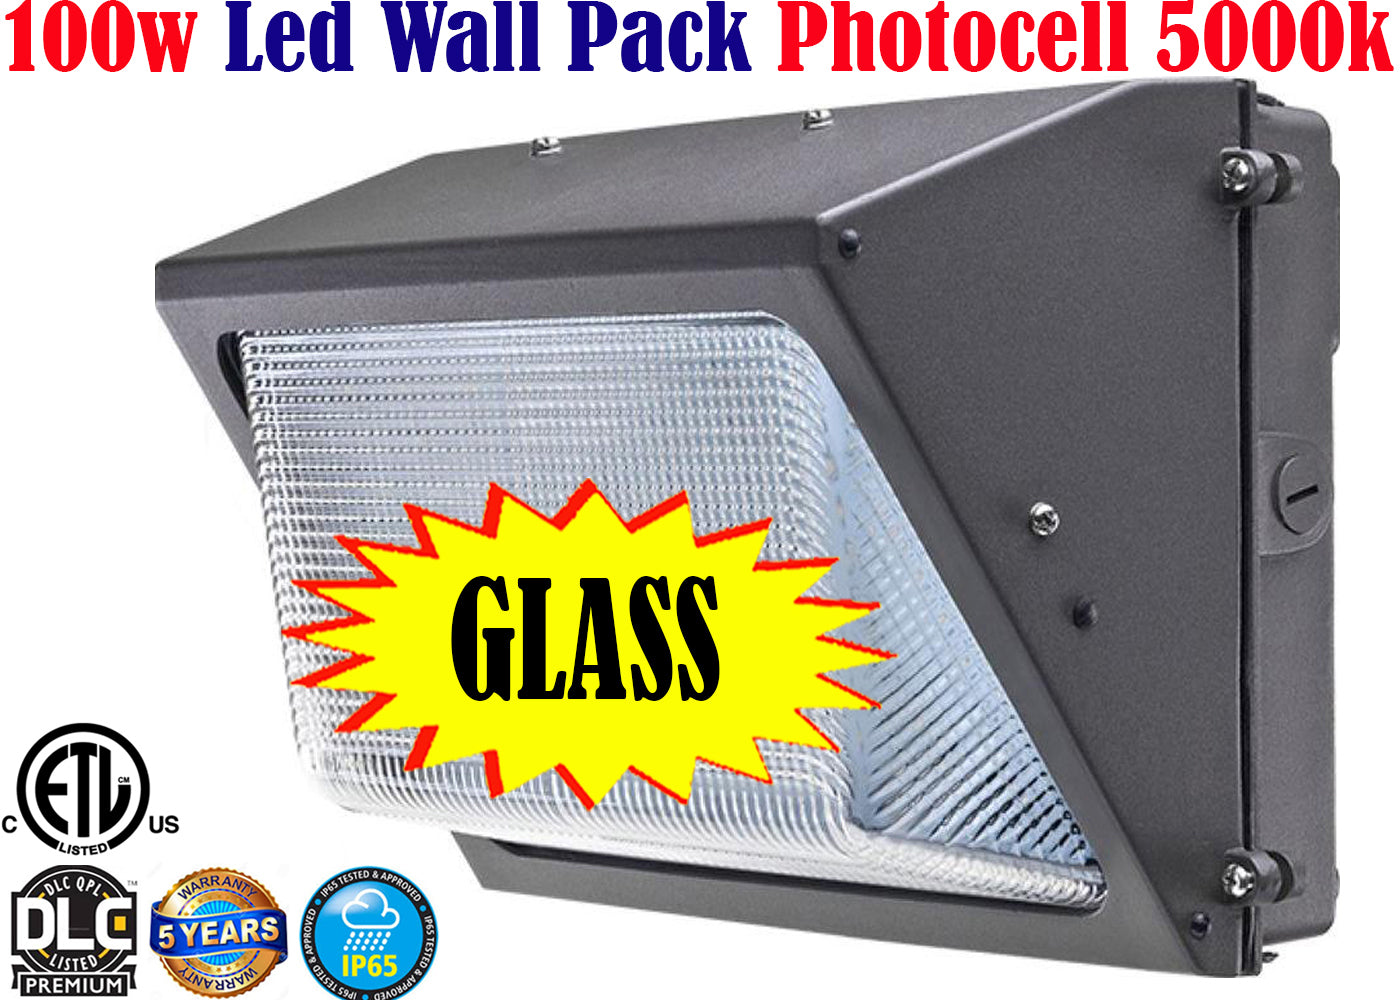 LED Wall Pack with Photocell, Canada 100w 5000k Exterior Garage Shop Barn